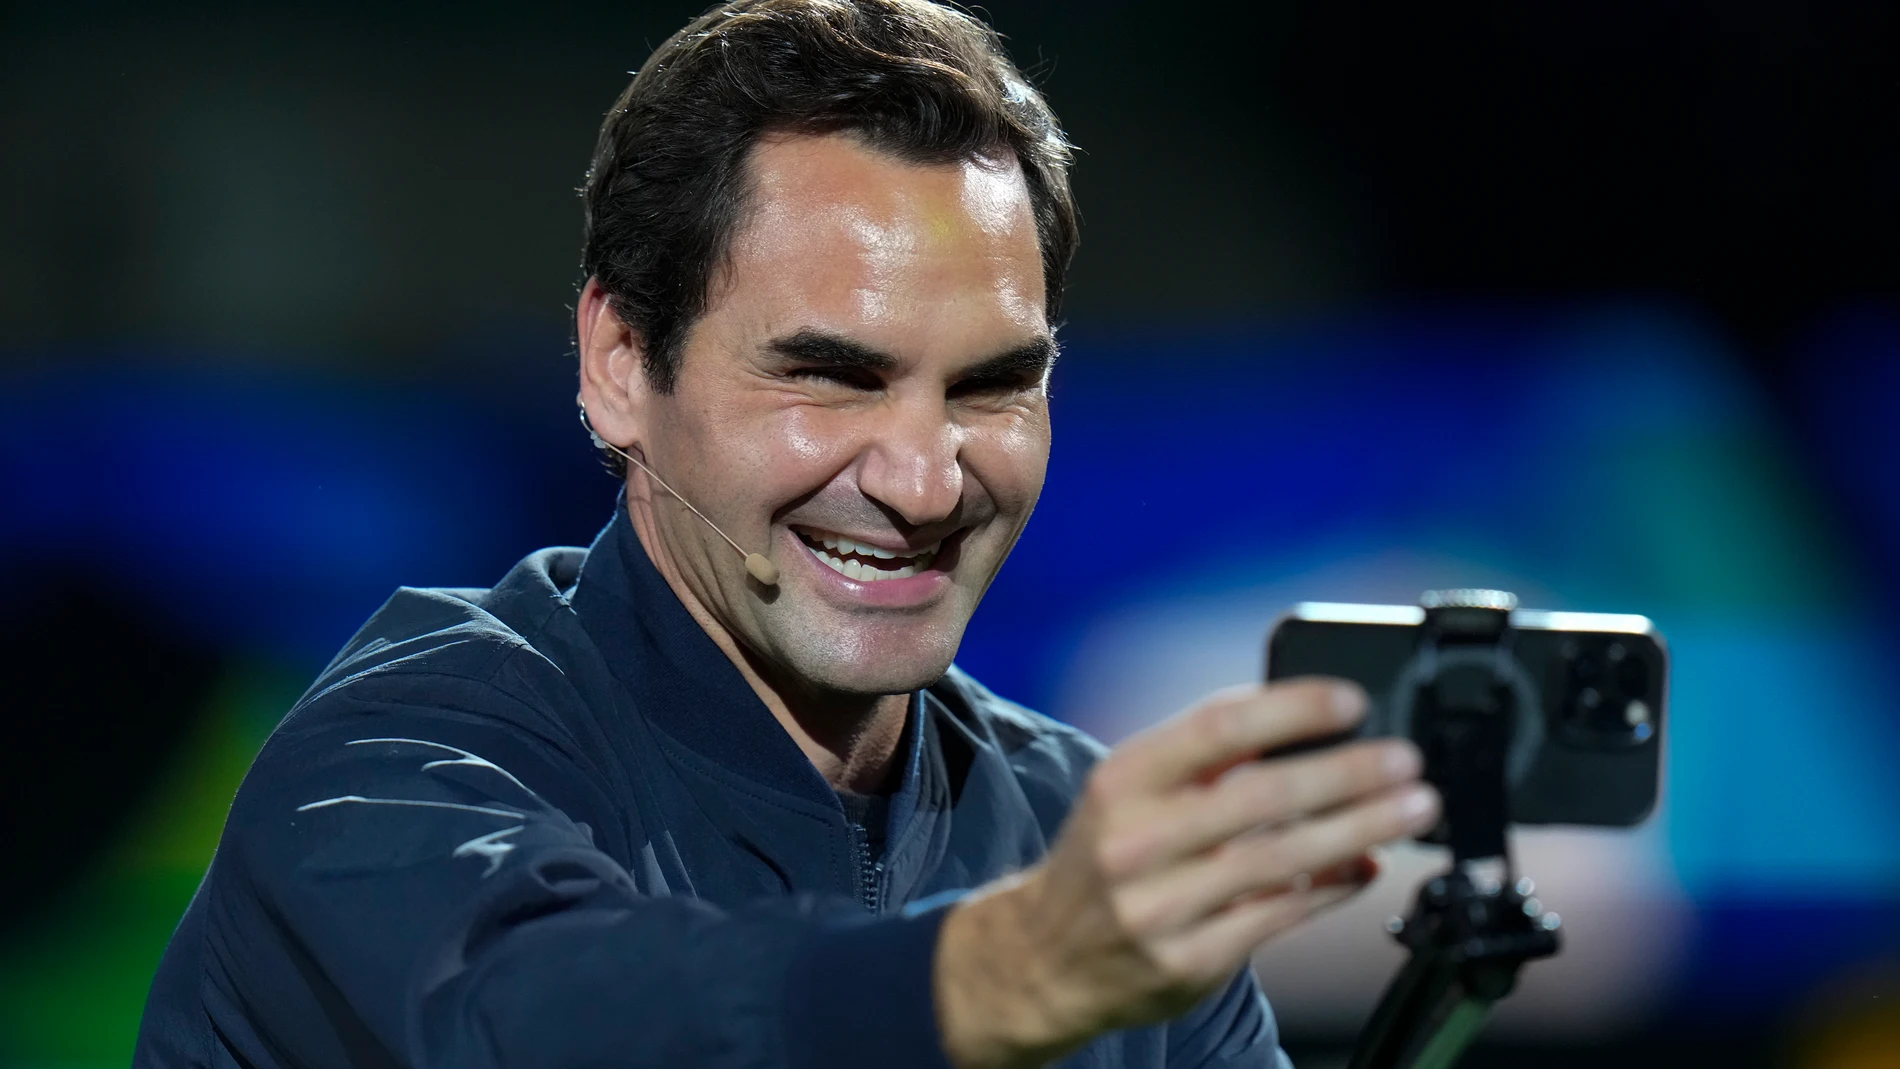 Retired tennis player Roger Federer takes a selfie with spectators during a Federer's fan day, a side event of the Shanghai Masters tennis tournament at Qizhong Forest Sports City Tennis Center in Shanghai, China, Friday, Oct. 13, 2023. (AP Photo/Andy Wong)